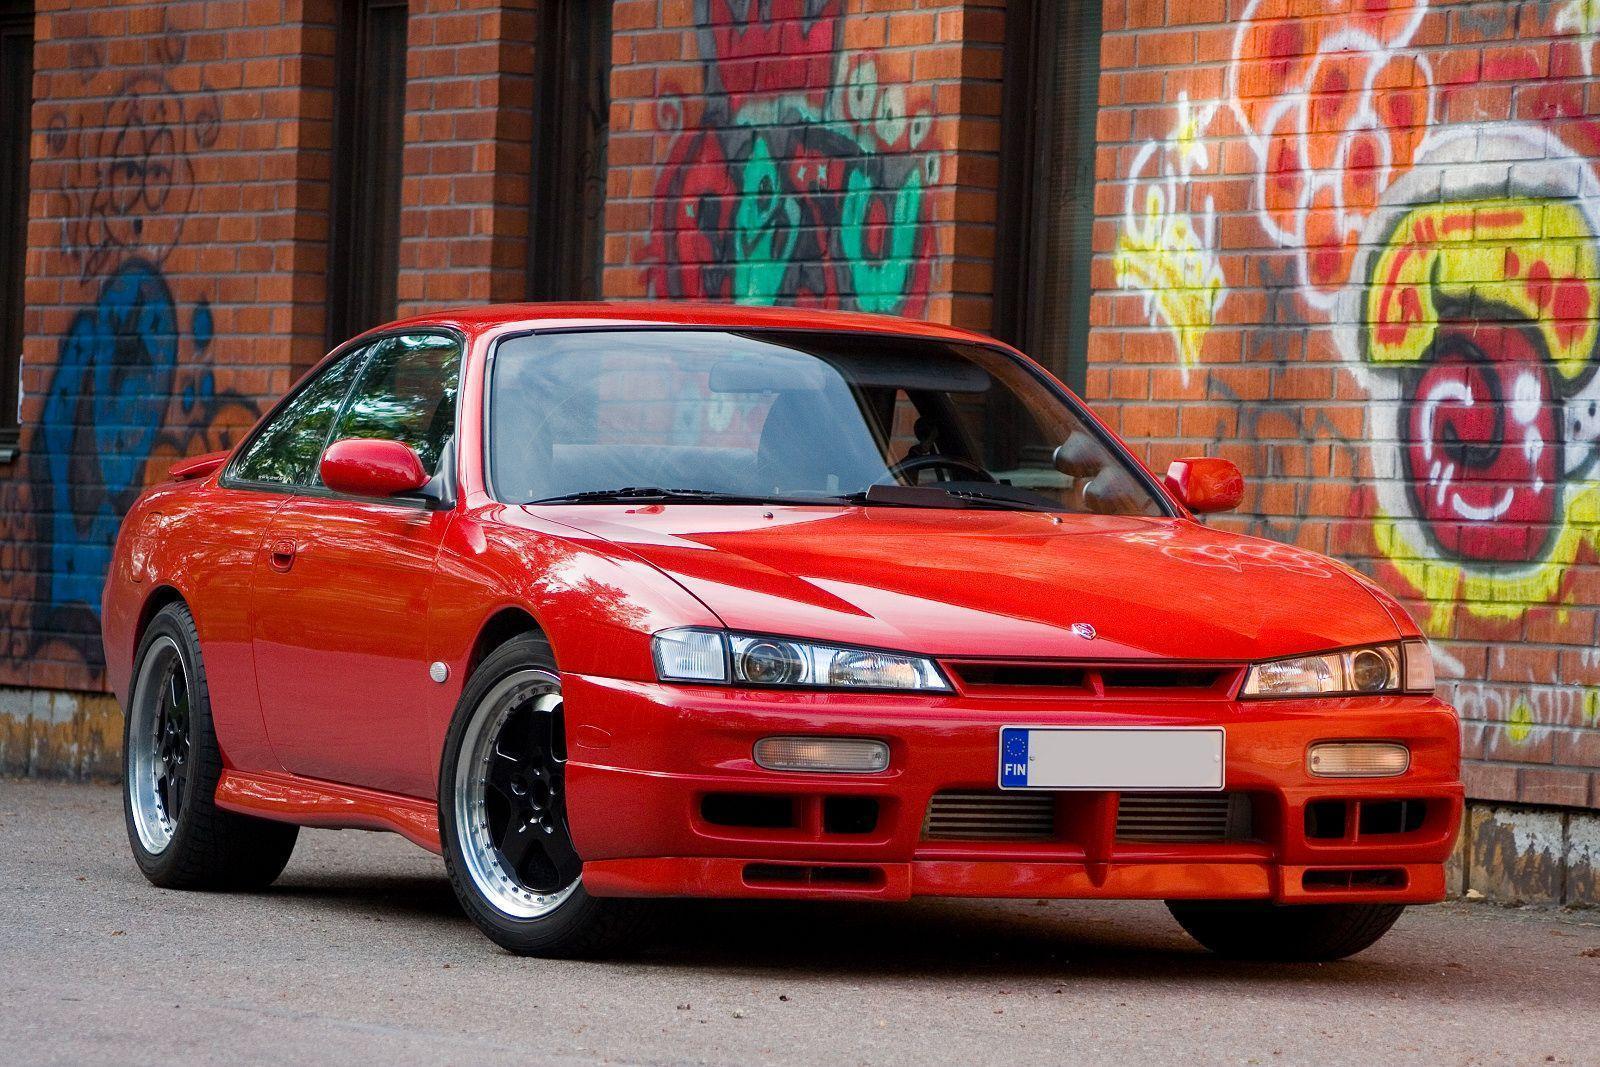 Nissan 200sx Photo and Wallpaper